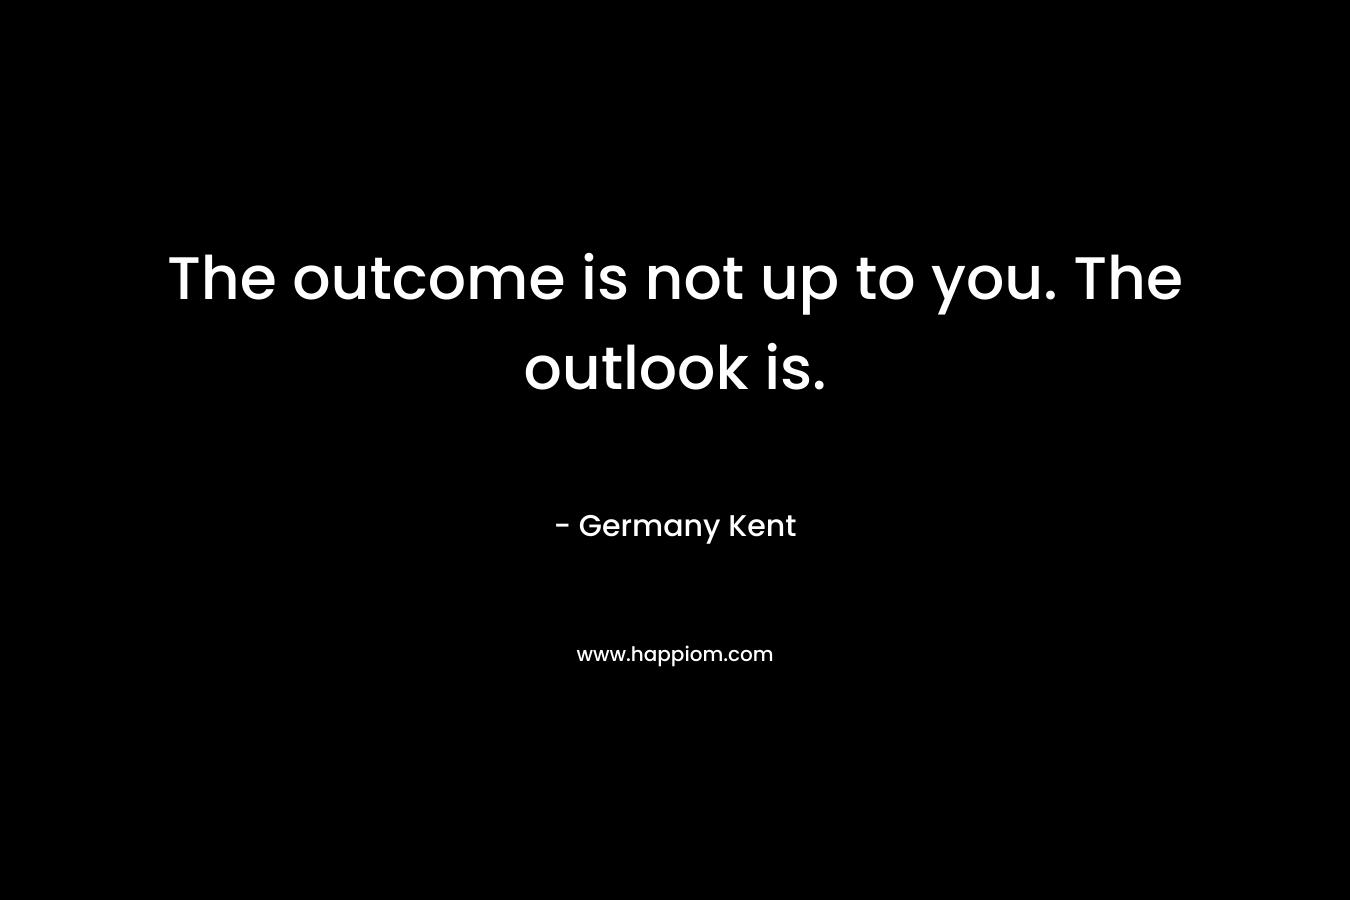 The outcome is not up to you. The outlook is.